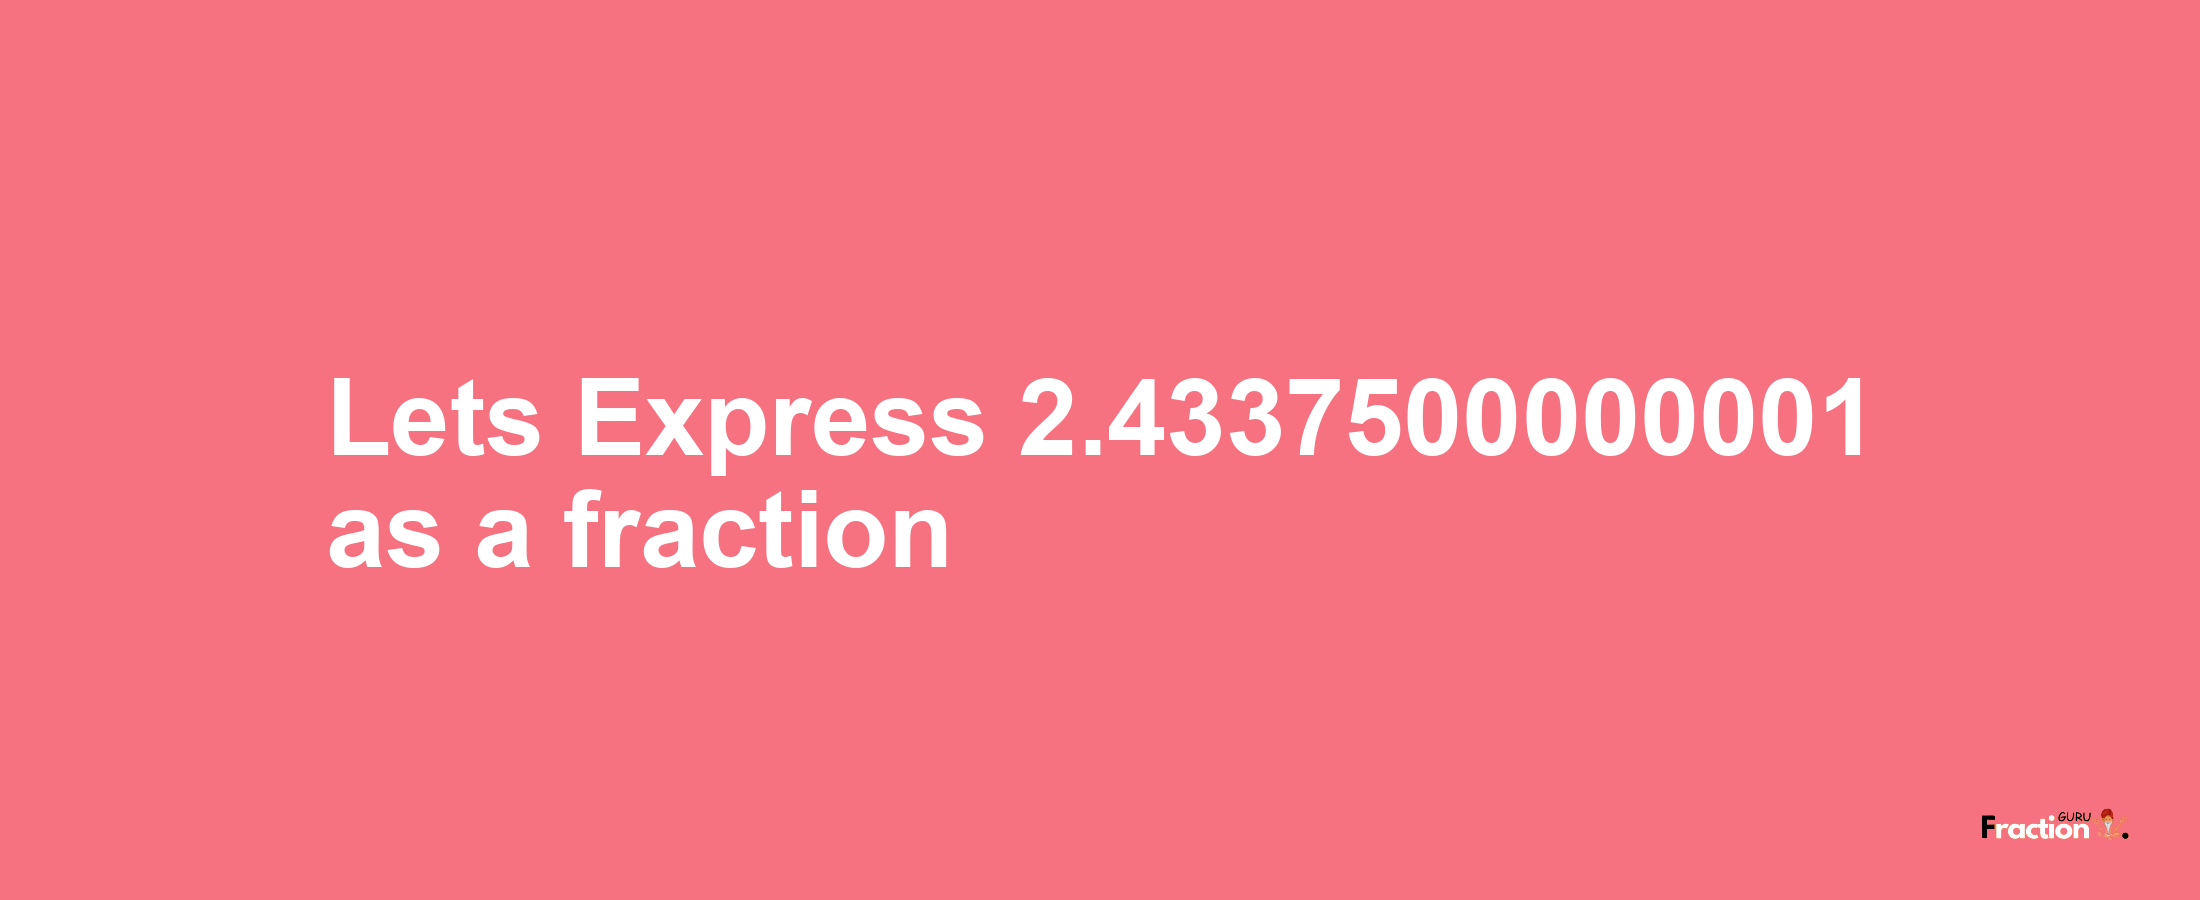 Lets Express 2.4337500000001 as afraction